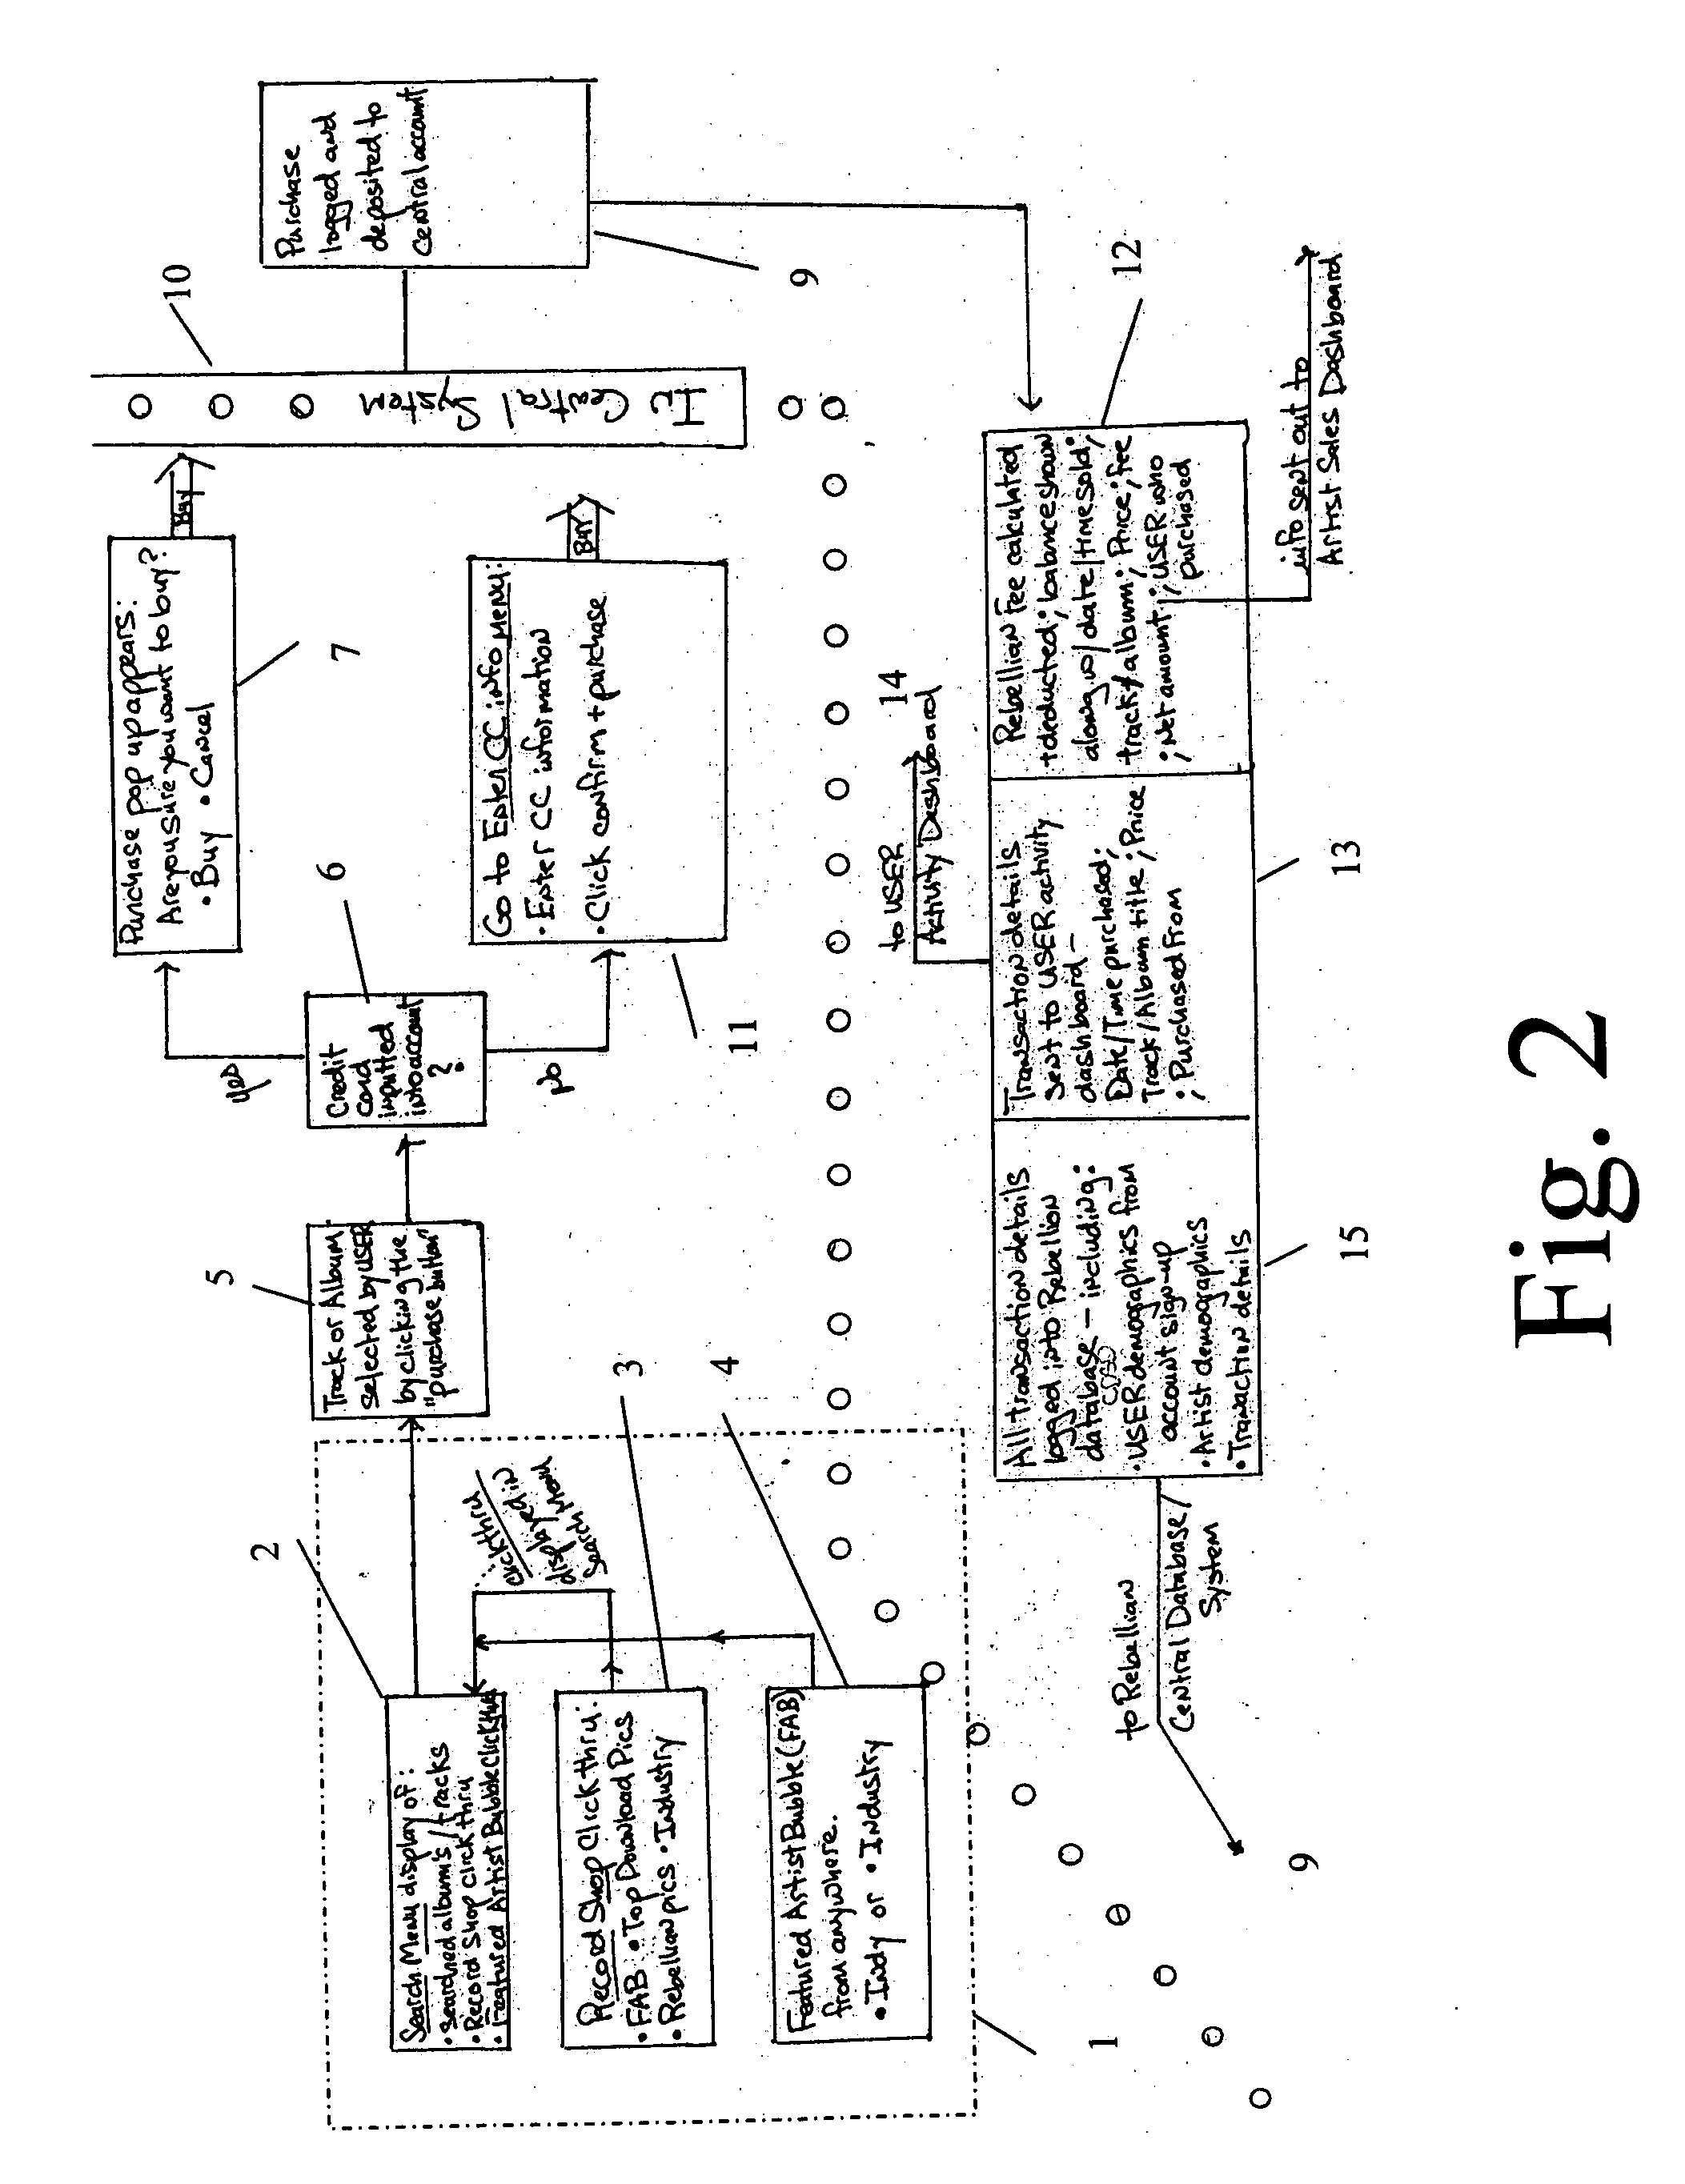 Method and system for the process of music creation, development, and distribution